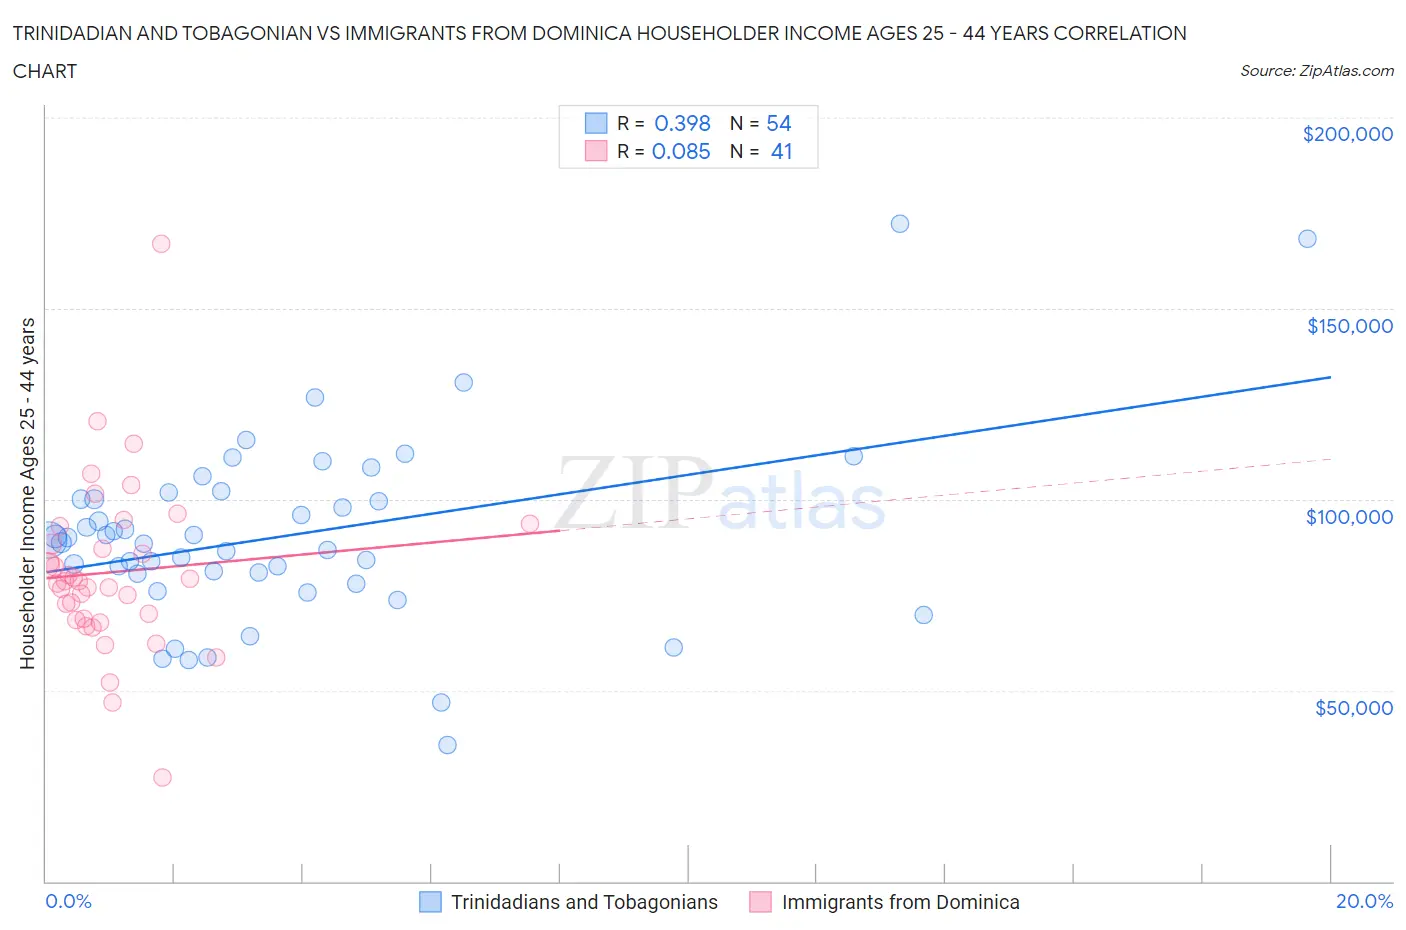 Trinidadian and Tobagonian vs Immigrants from Dominica Householder Income Ages 25 - 44 years